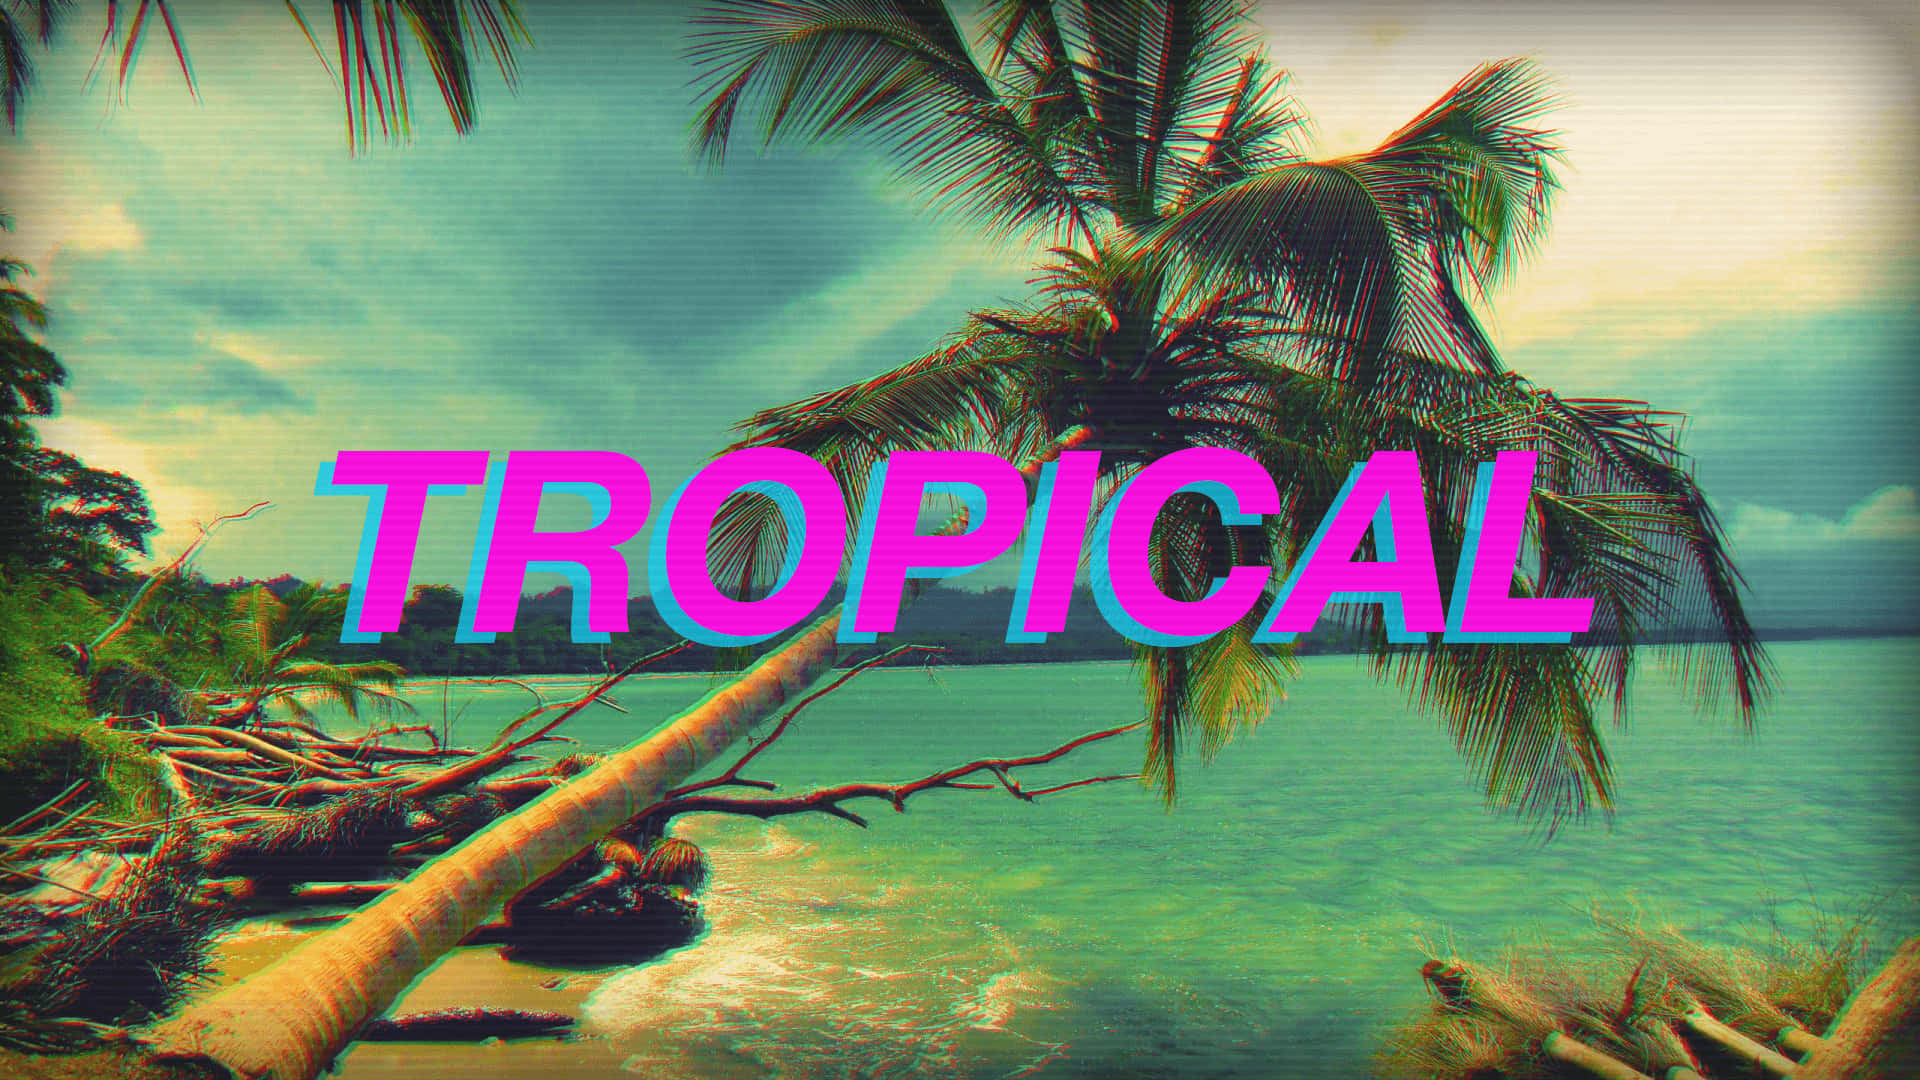 A Person Enjoying the Beauty of an Aesthetic Tropical Scene Wallpaper